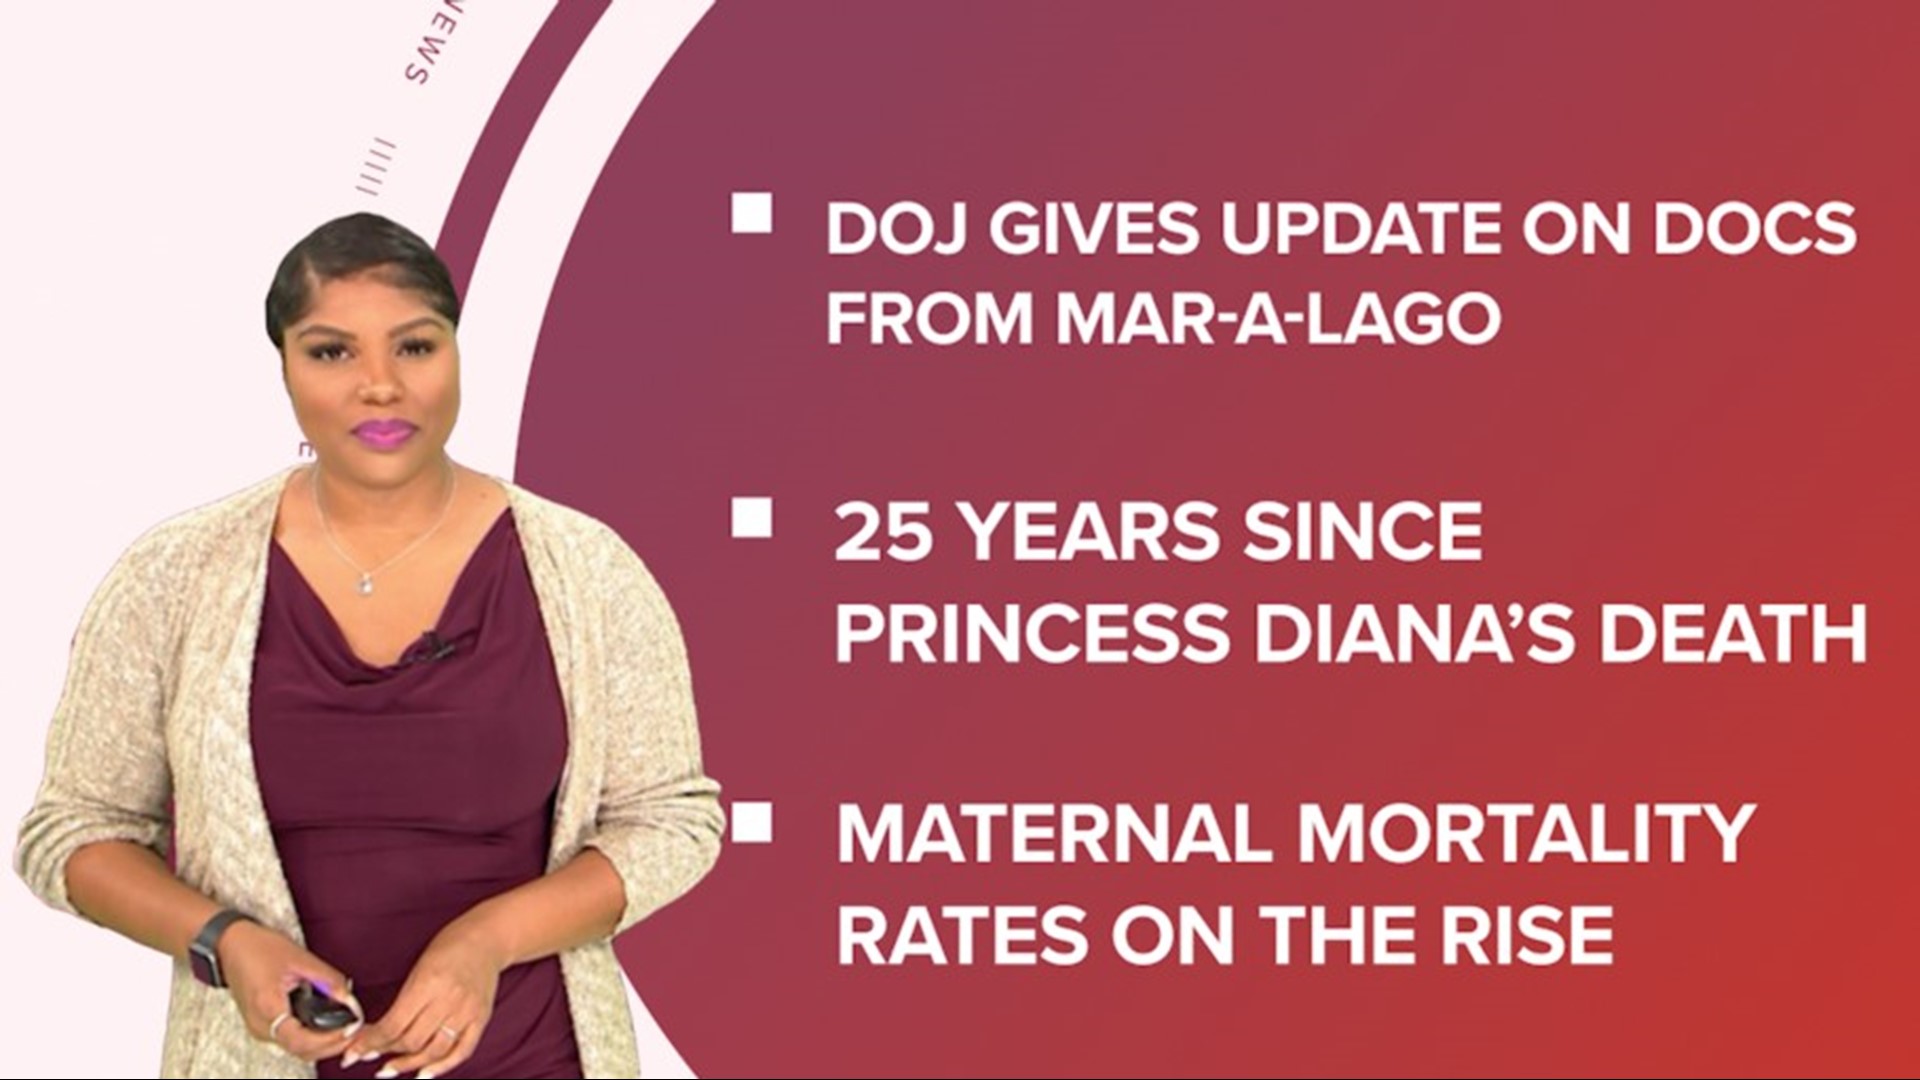 A look at what is happening in the news from DOJ updates on the documents seized from Mar-a-lago to marking 25 years since Princess Diana's death.